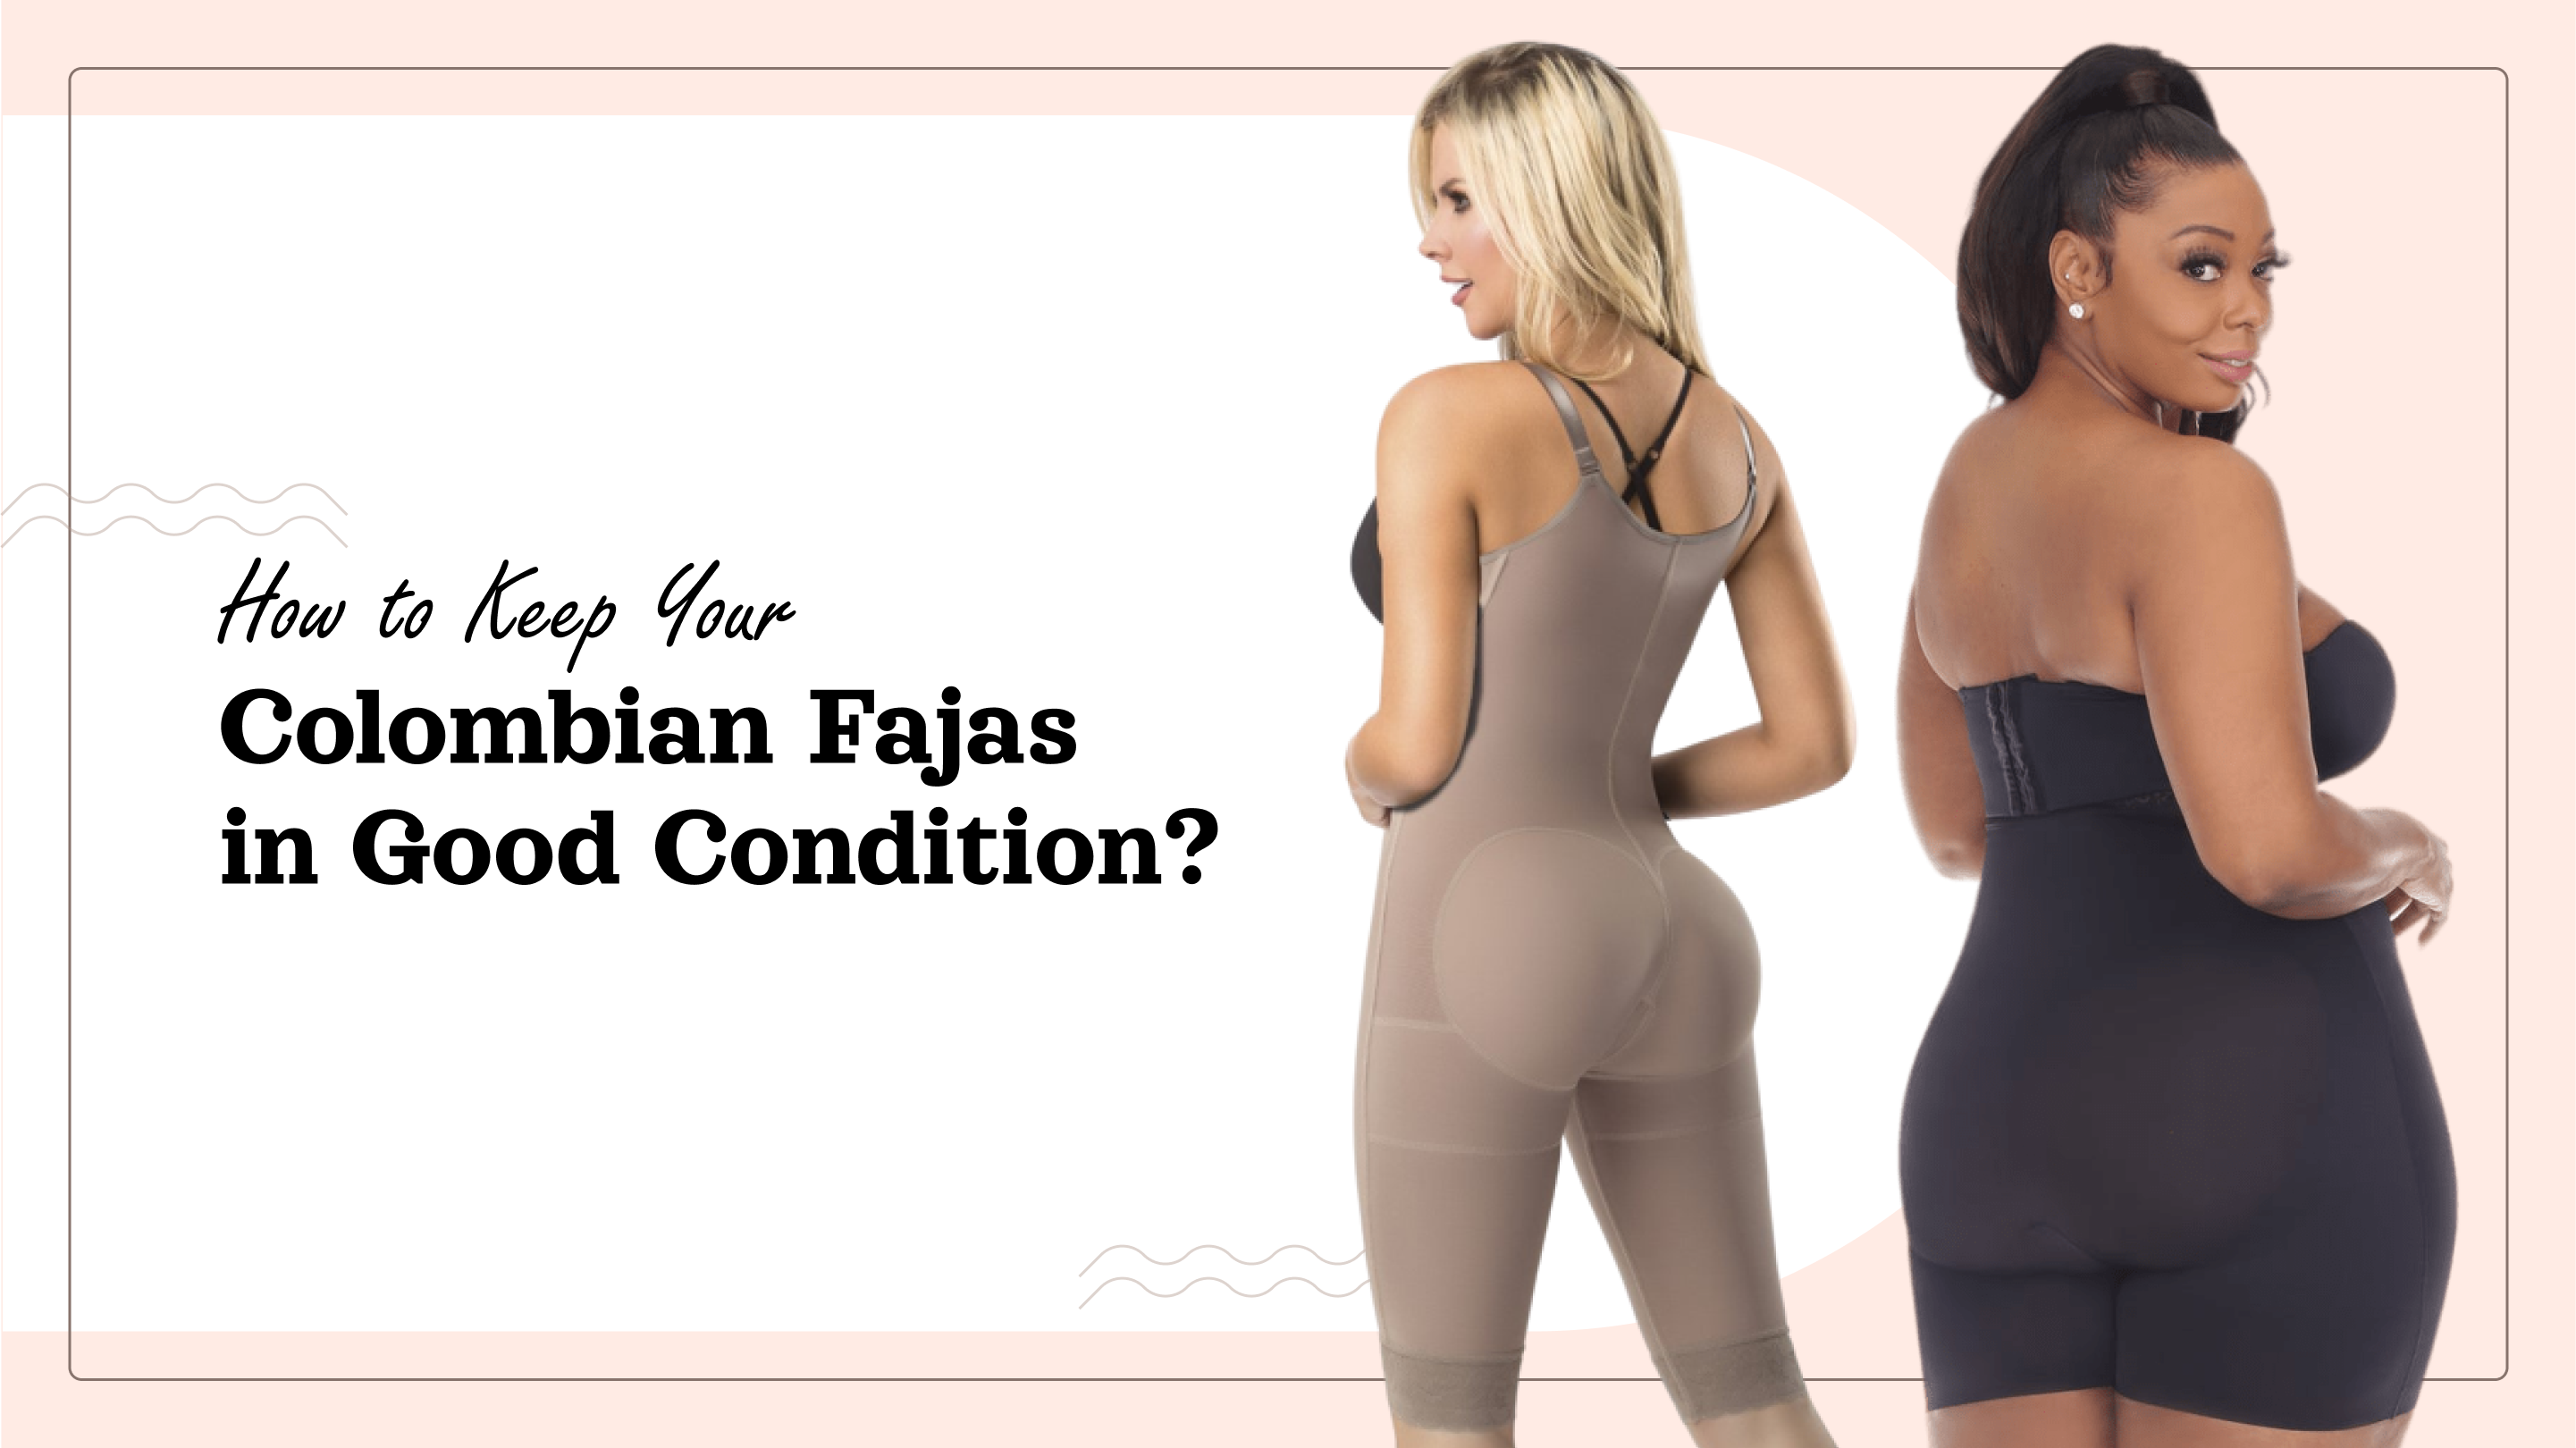 How to Keep Your Colombian Fajas in Good Condition